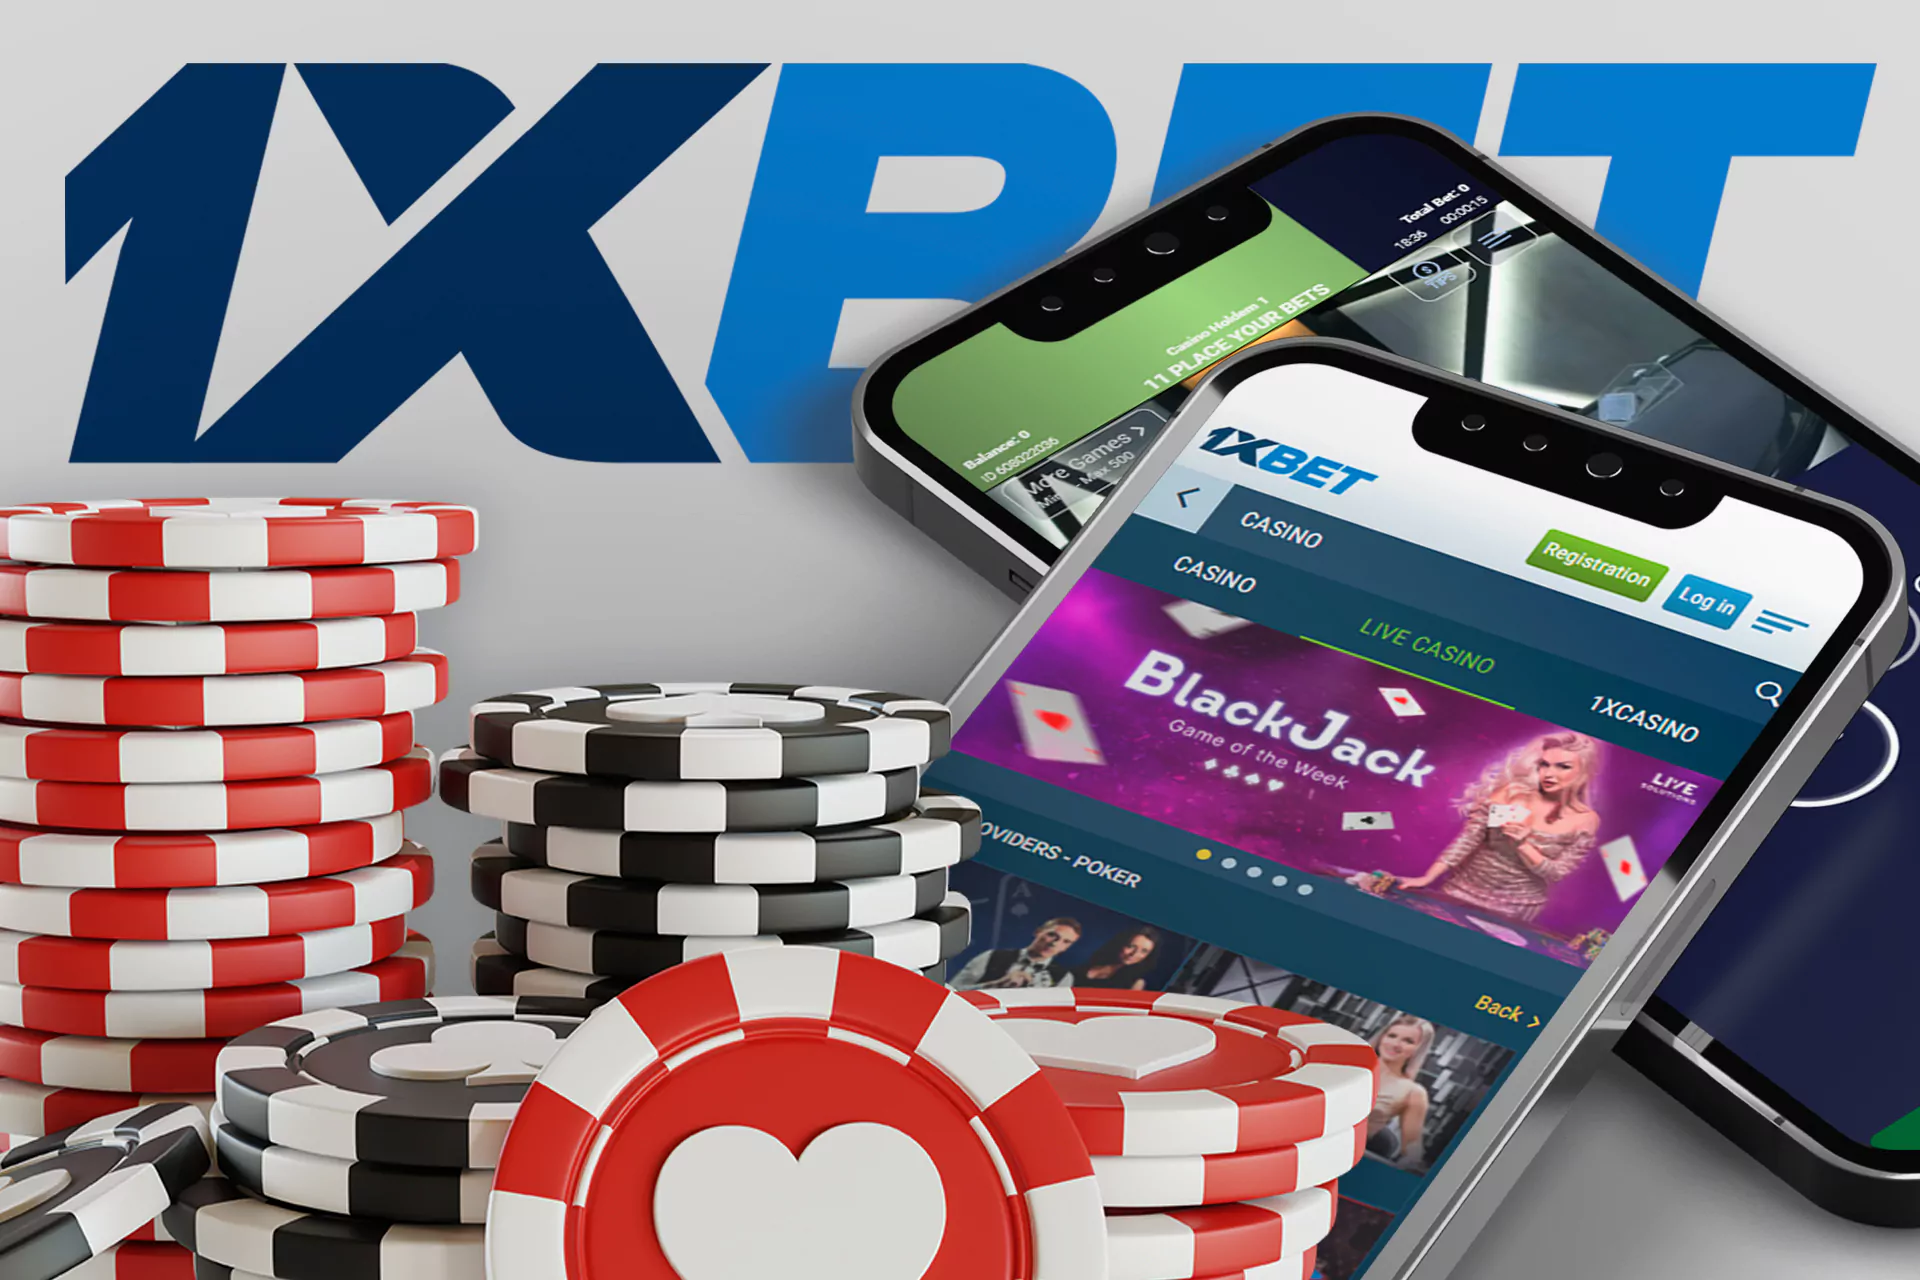 Try your chances at poker with 1xBet India.